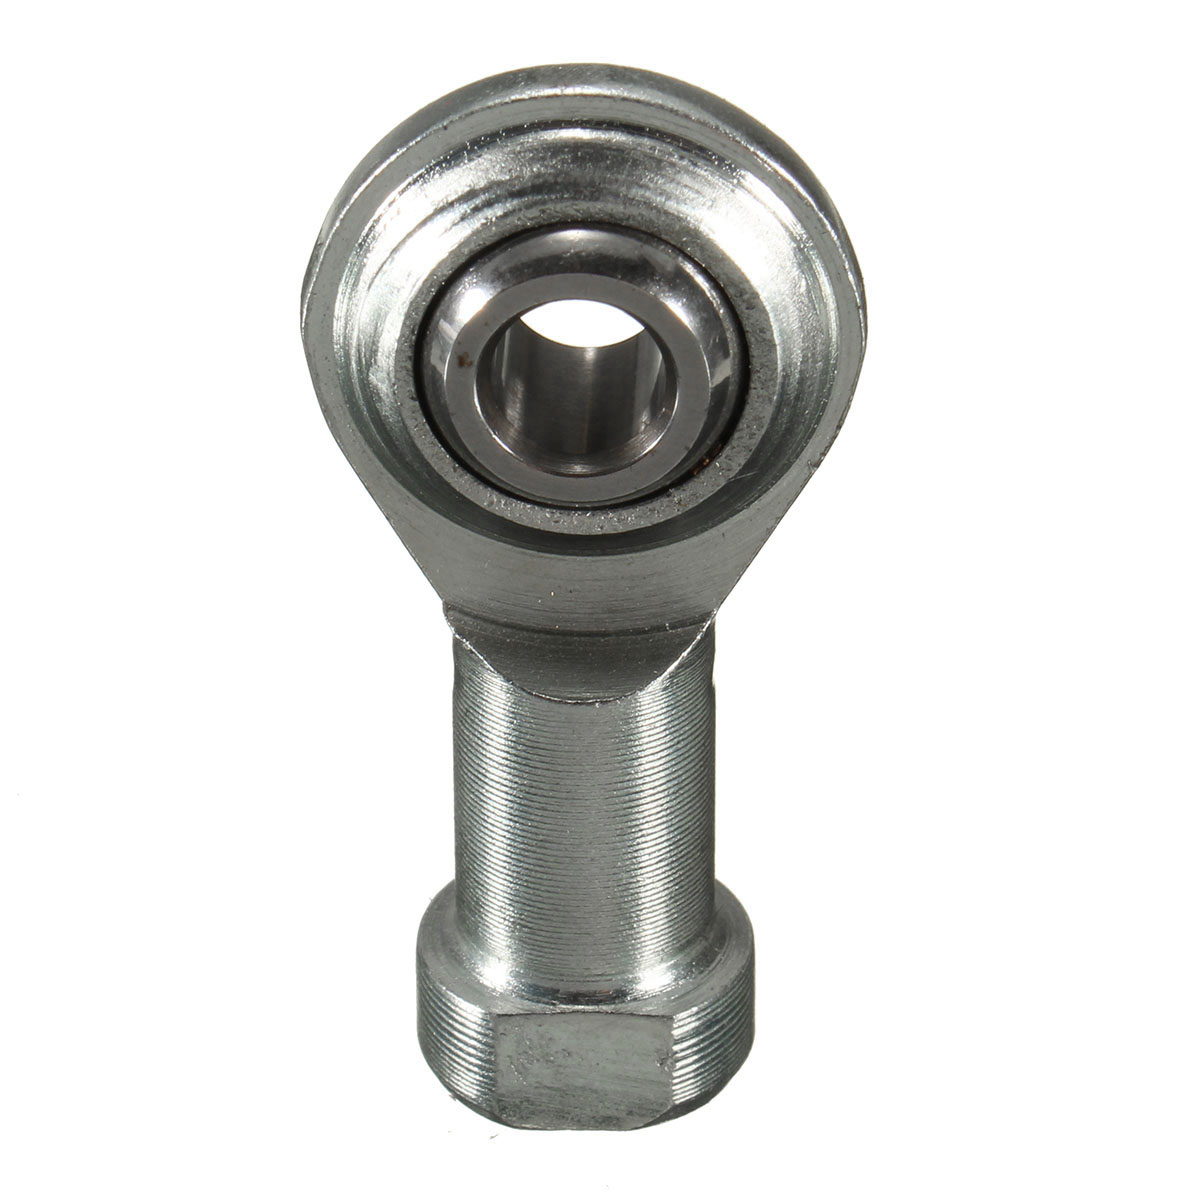 10pcs-M6-x-1mm-Right-Hand-Thread-Rod-End-Joint-Bearing-6mm-Female-Thread-Joint-Ball-Bearing-1586679-4